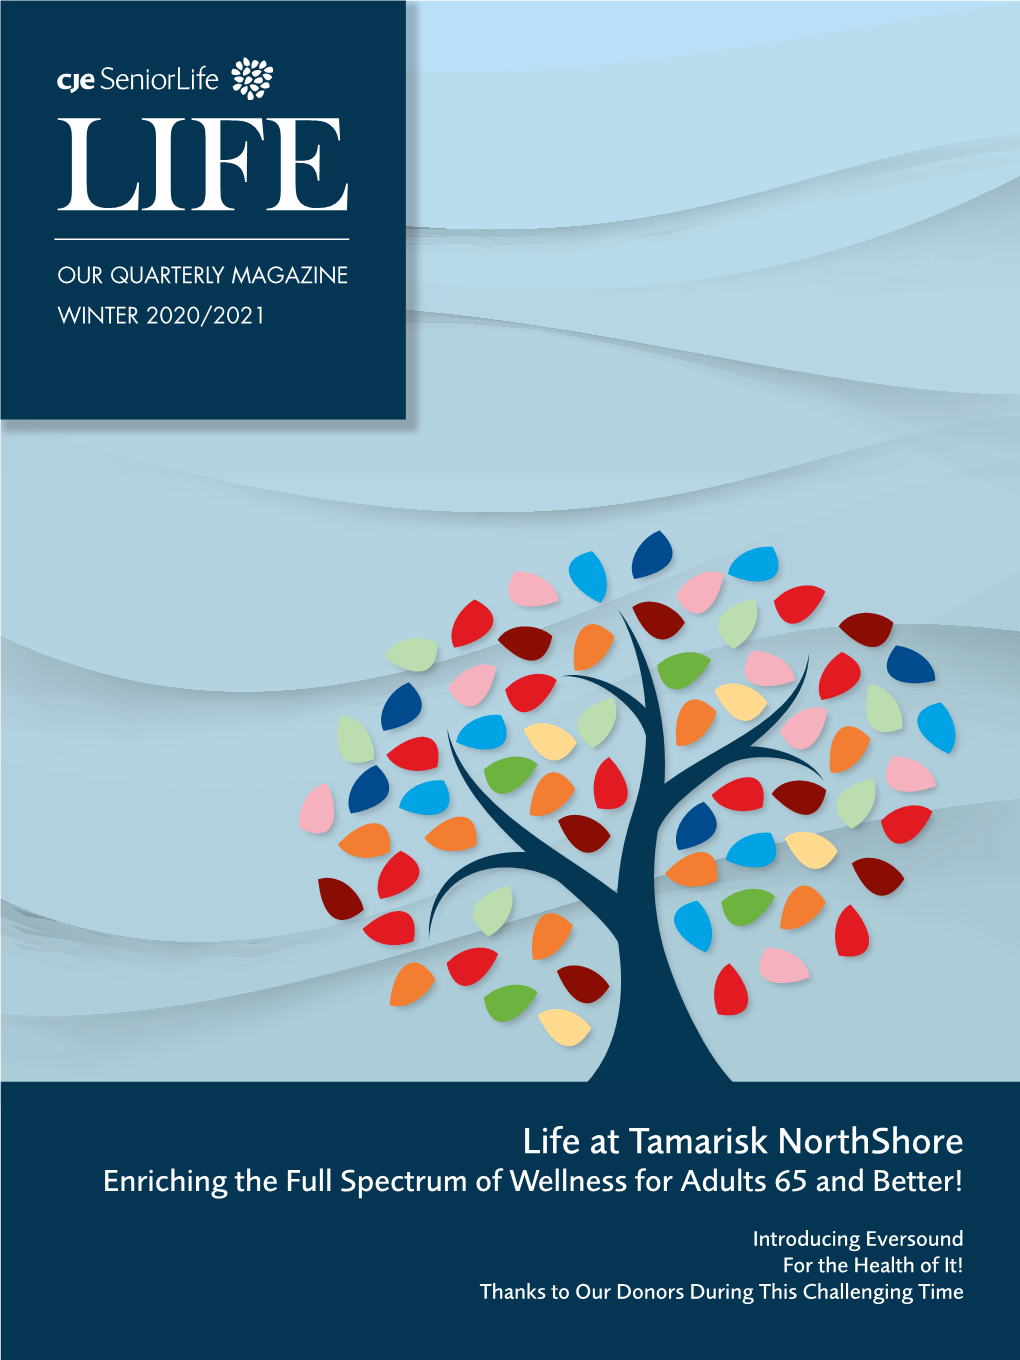 Life at Tamarisk Northshore Enriching the Full Spectrum of Wellness for Adults 65 and Better!